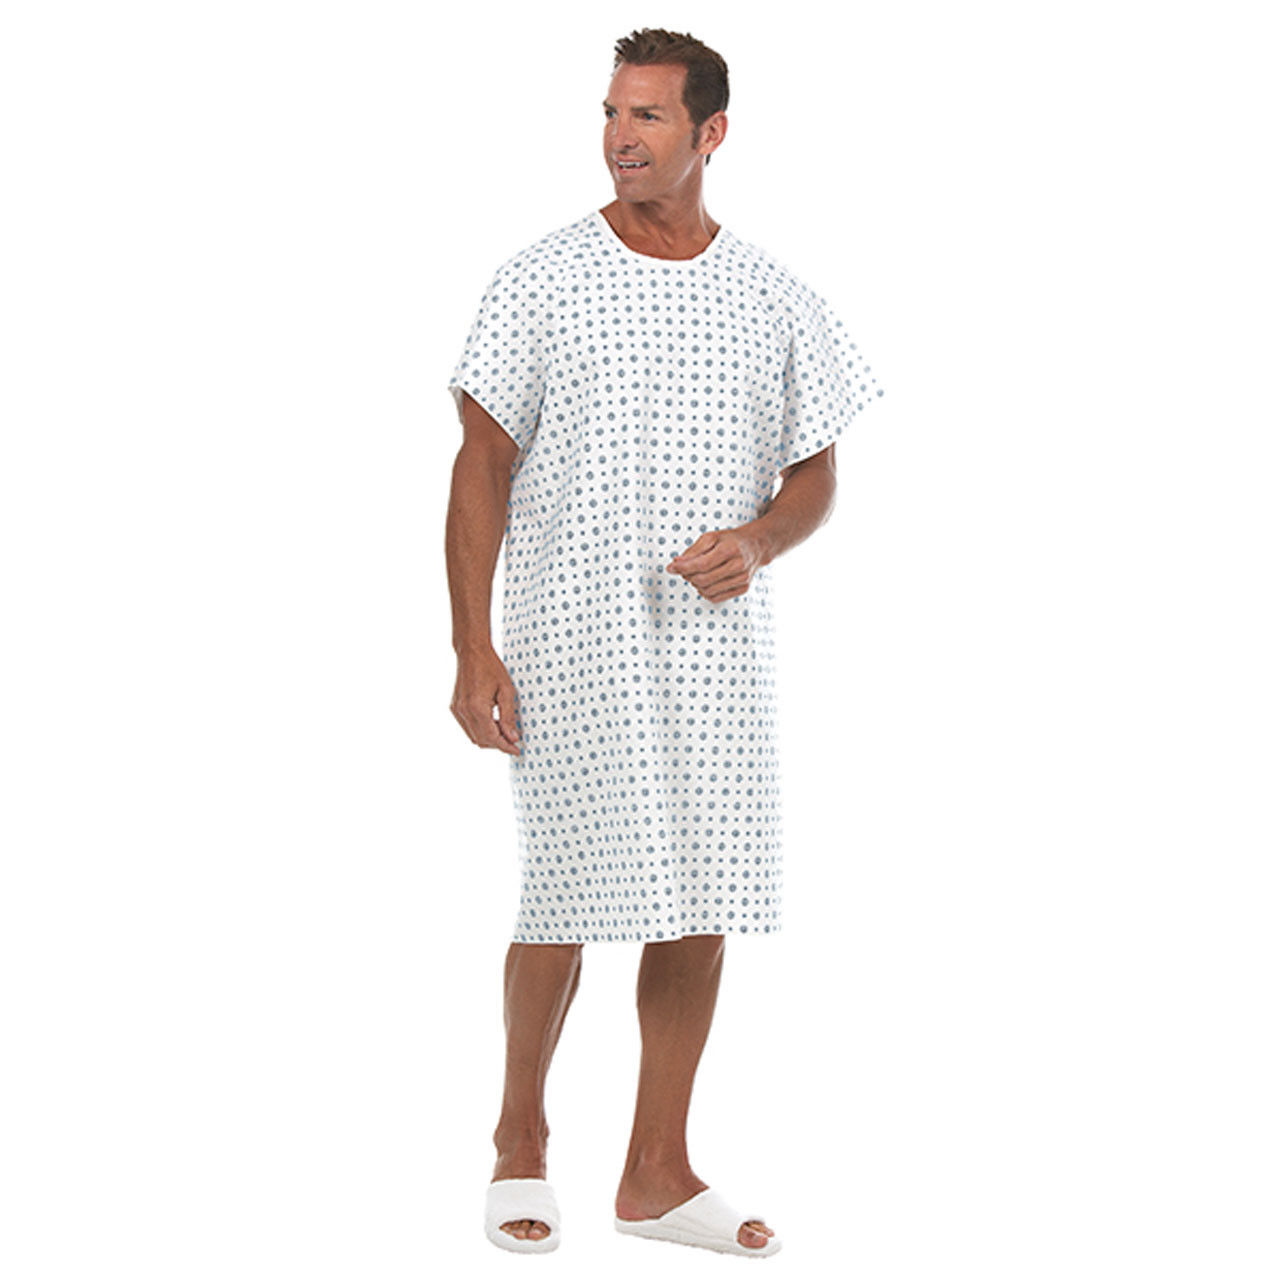 Do the comfortable patient gowns have specific insleeve measurements?